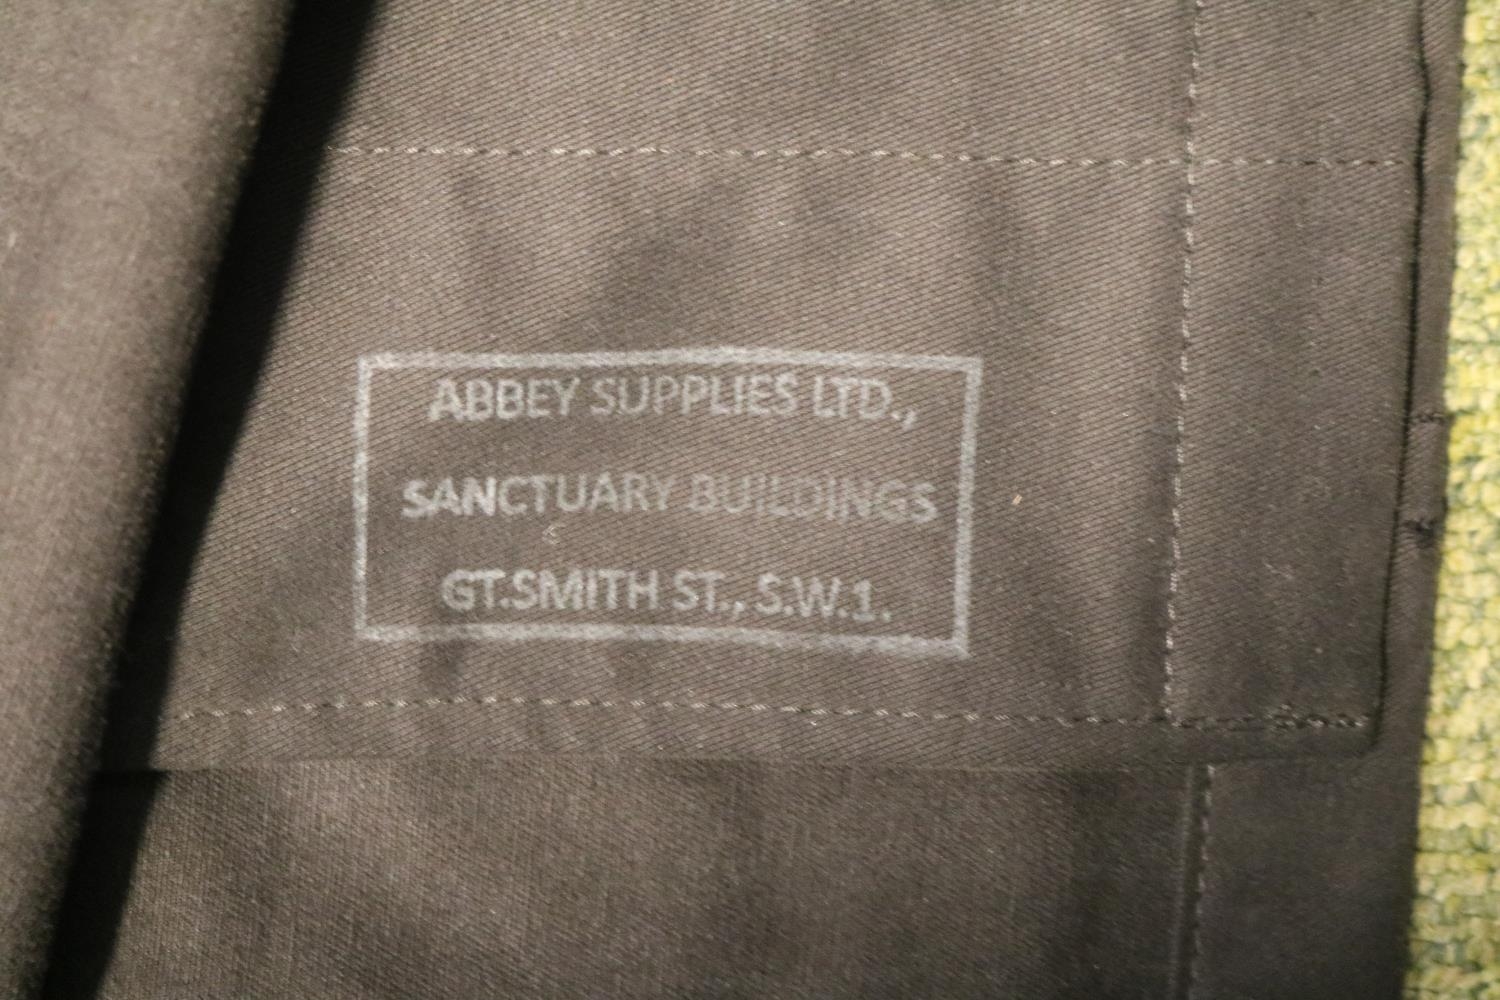 British Union of Fascists (Oswald Mosley) Shirt with arm band, Abbey suppliers ltd, Silver - Image 5 of 5